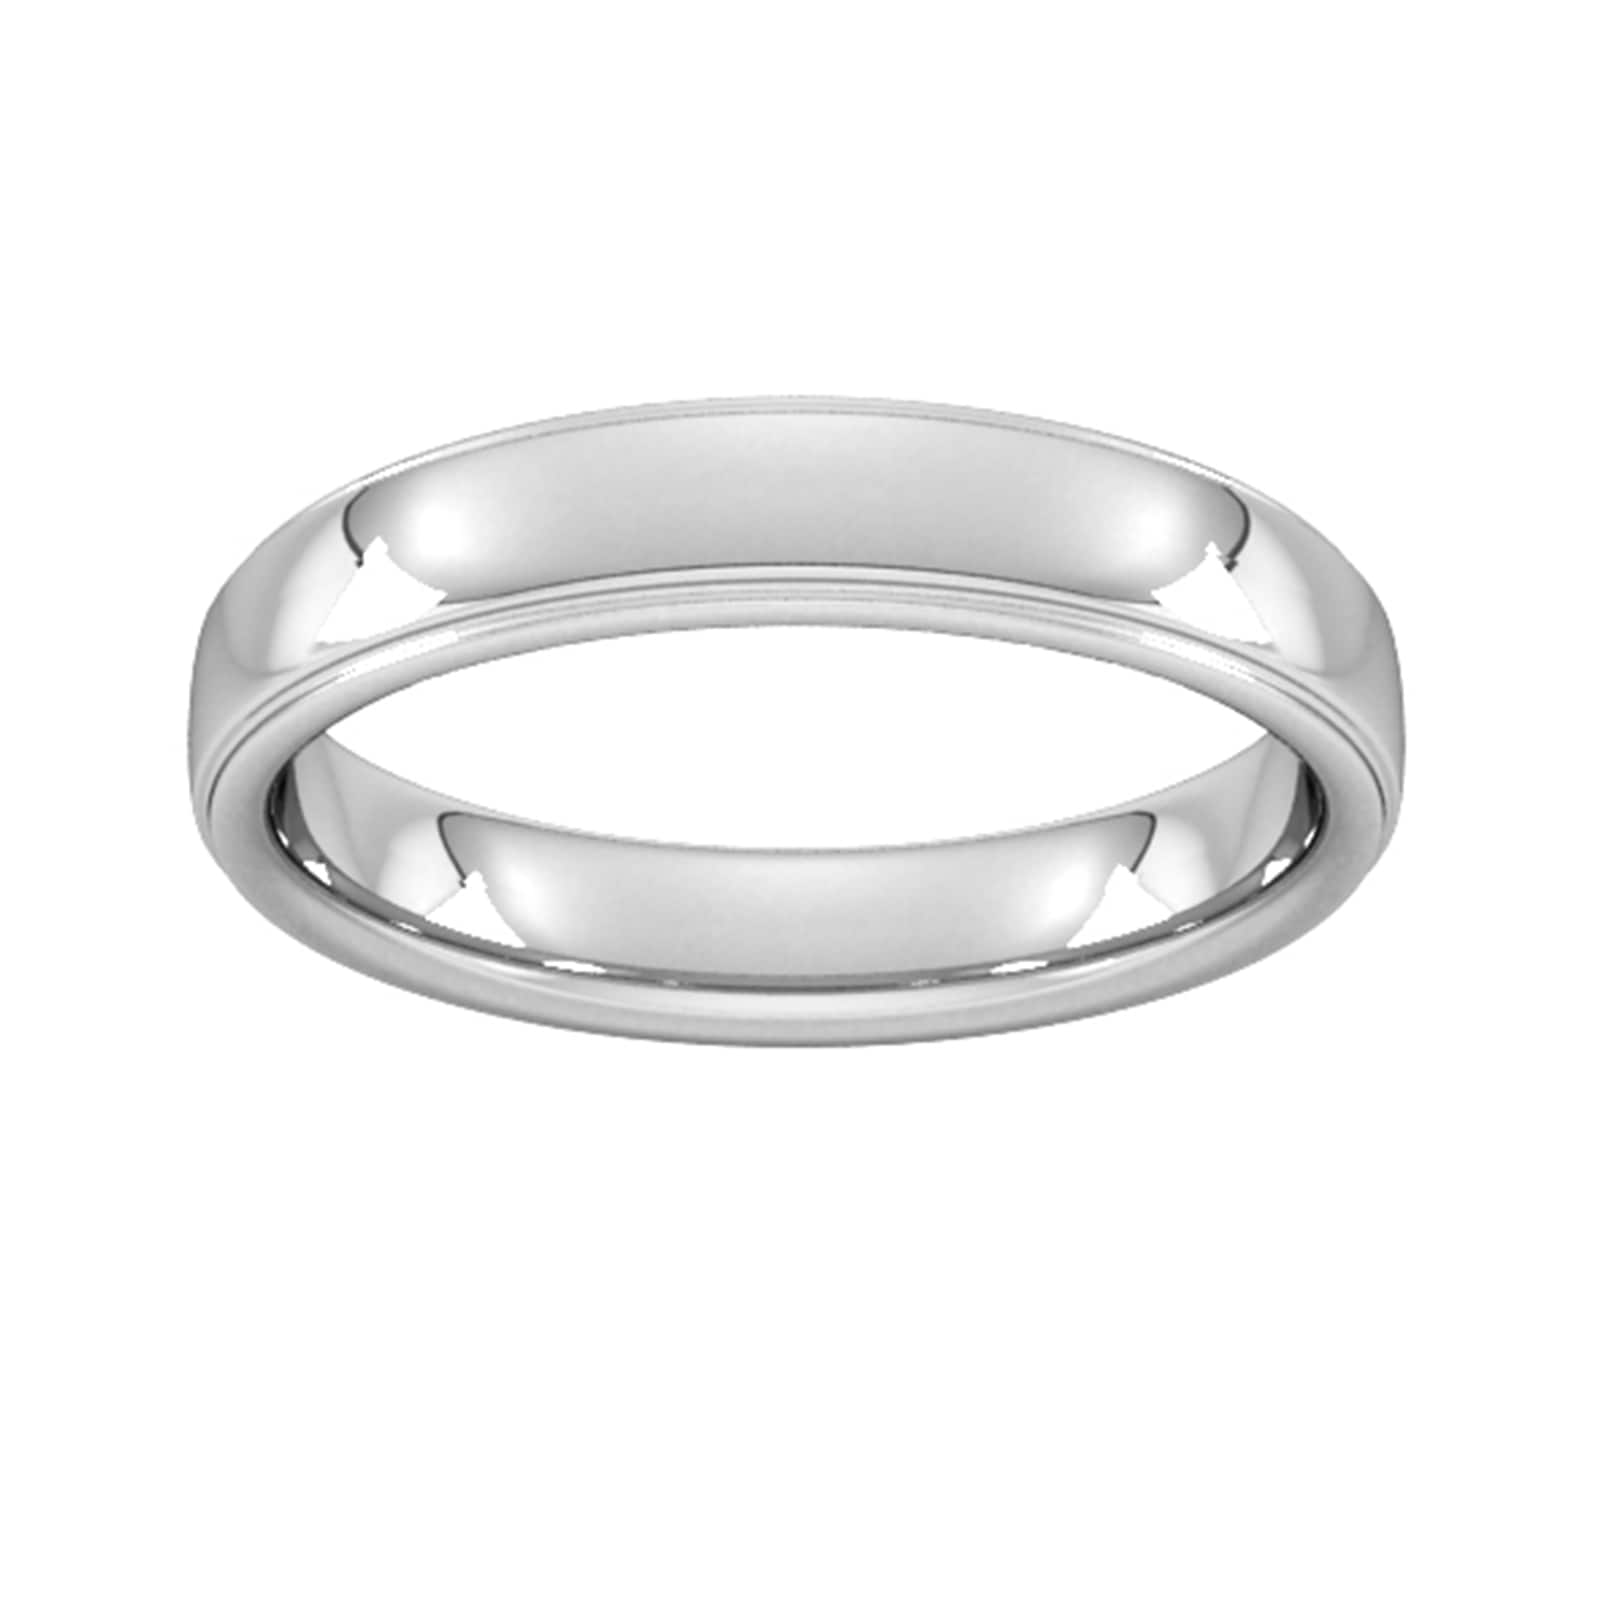 4mm Slight Court Heavy Polished Finish With Grooves Wedding Ring In 18 Carat White Gold - Ring Size G